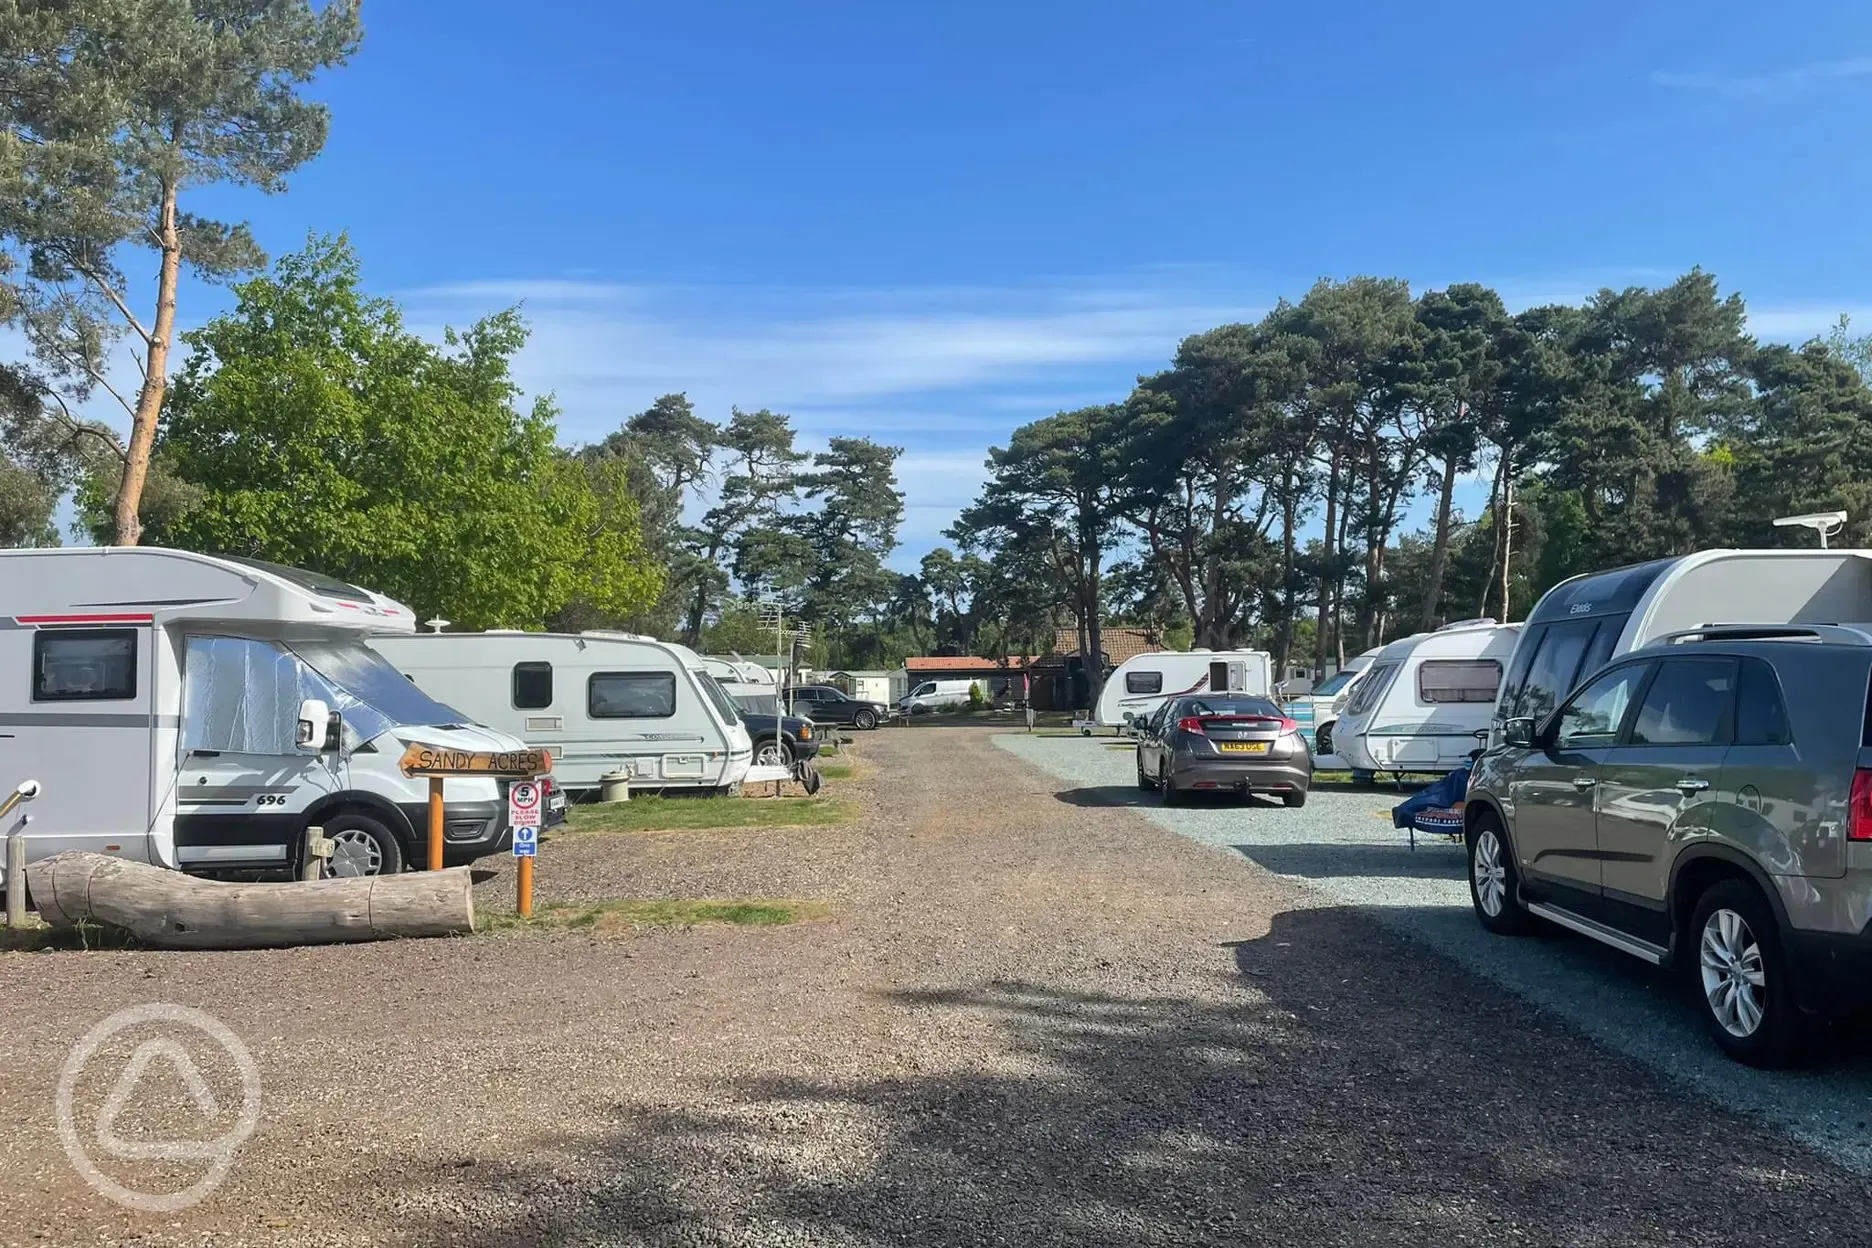 Small fully serviced hardstanding pitches